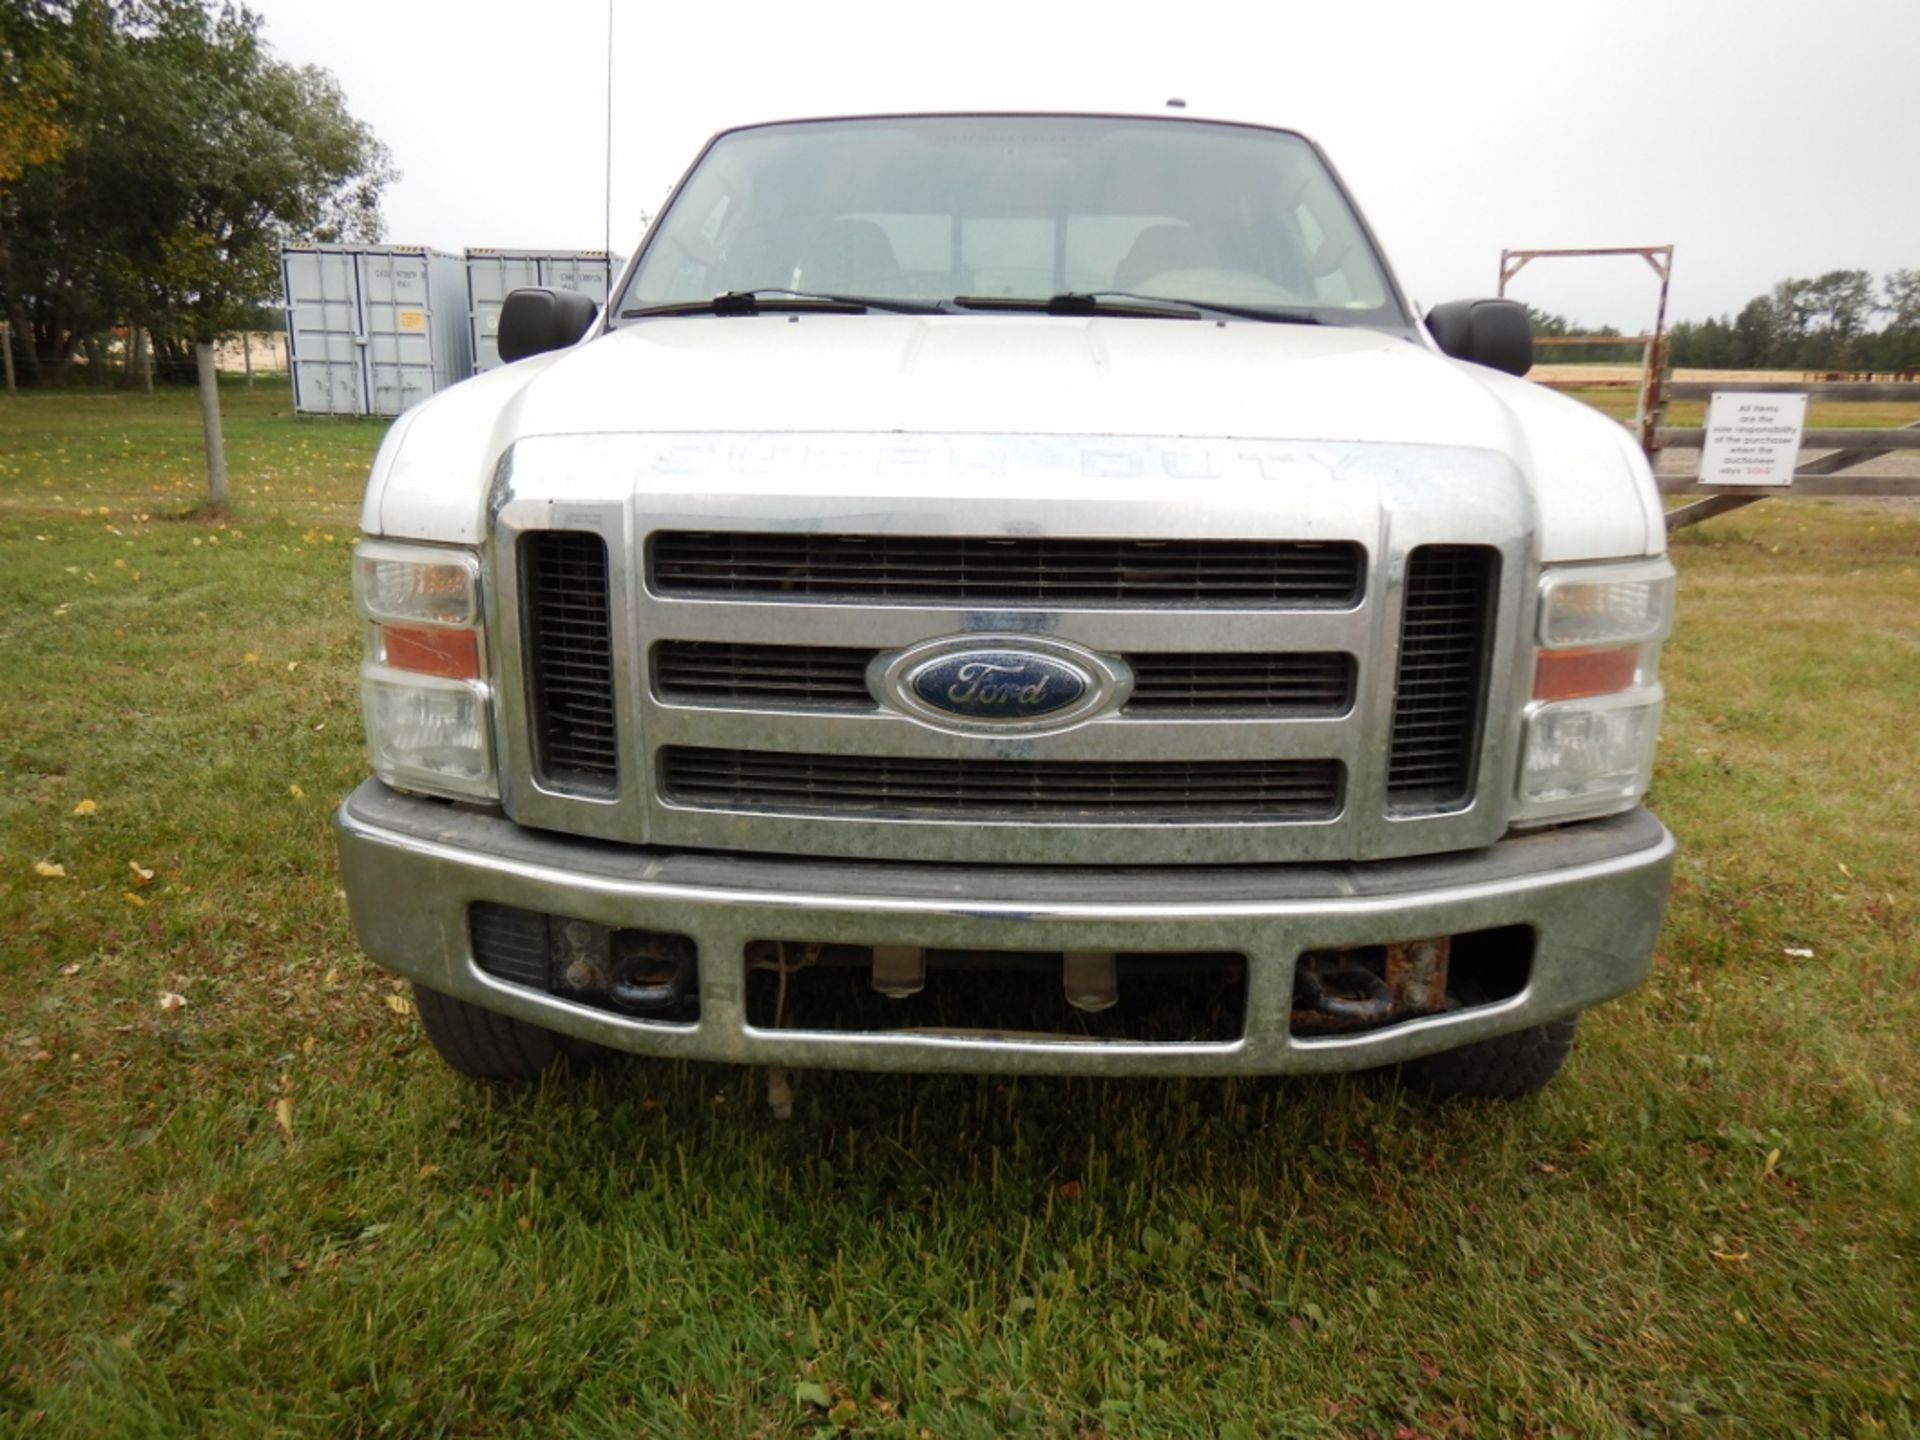 2007 FORD F350 XLT 4X4 V8 P/U TRUCK, A/T, CREW CAB, 8FT BOX (DAMAGED), 362,299 KM'S SHOWING - Image 4 of 10